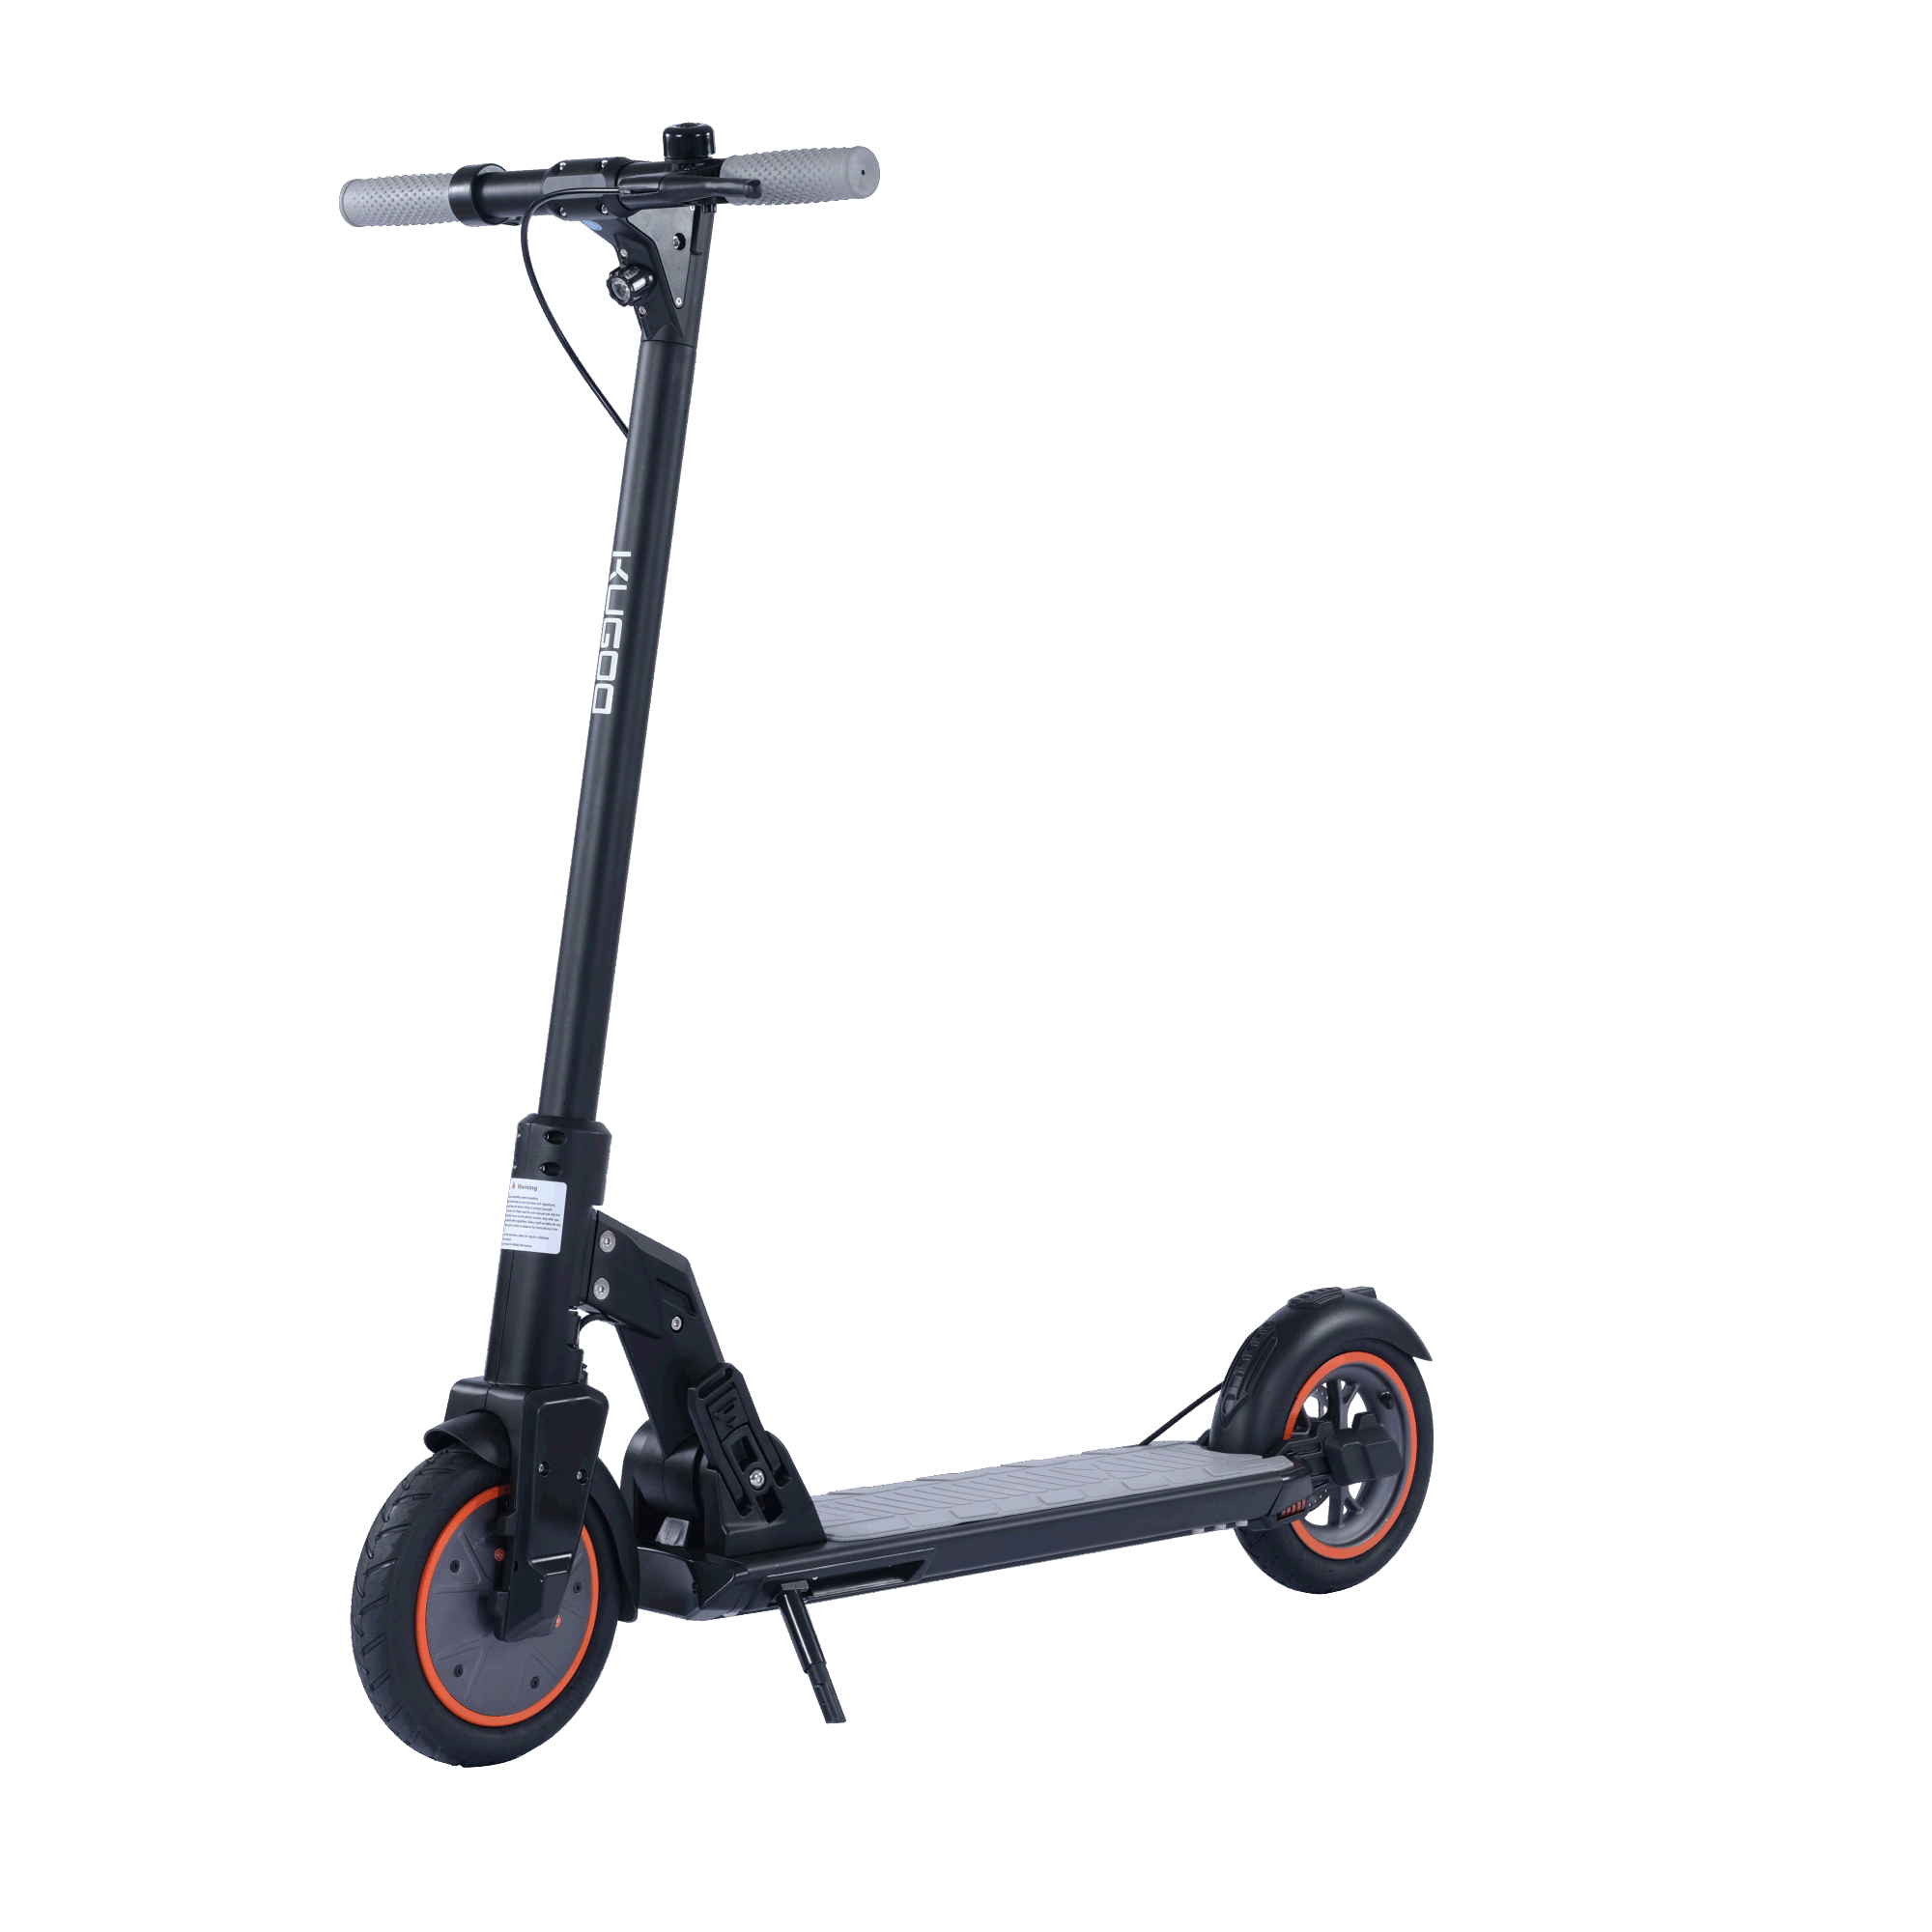 Hot Selling KUGOO M2 PRO 2 Wheel 8.5 Inch Tire 350W Electric Scooter